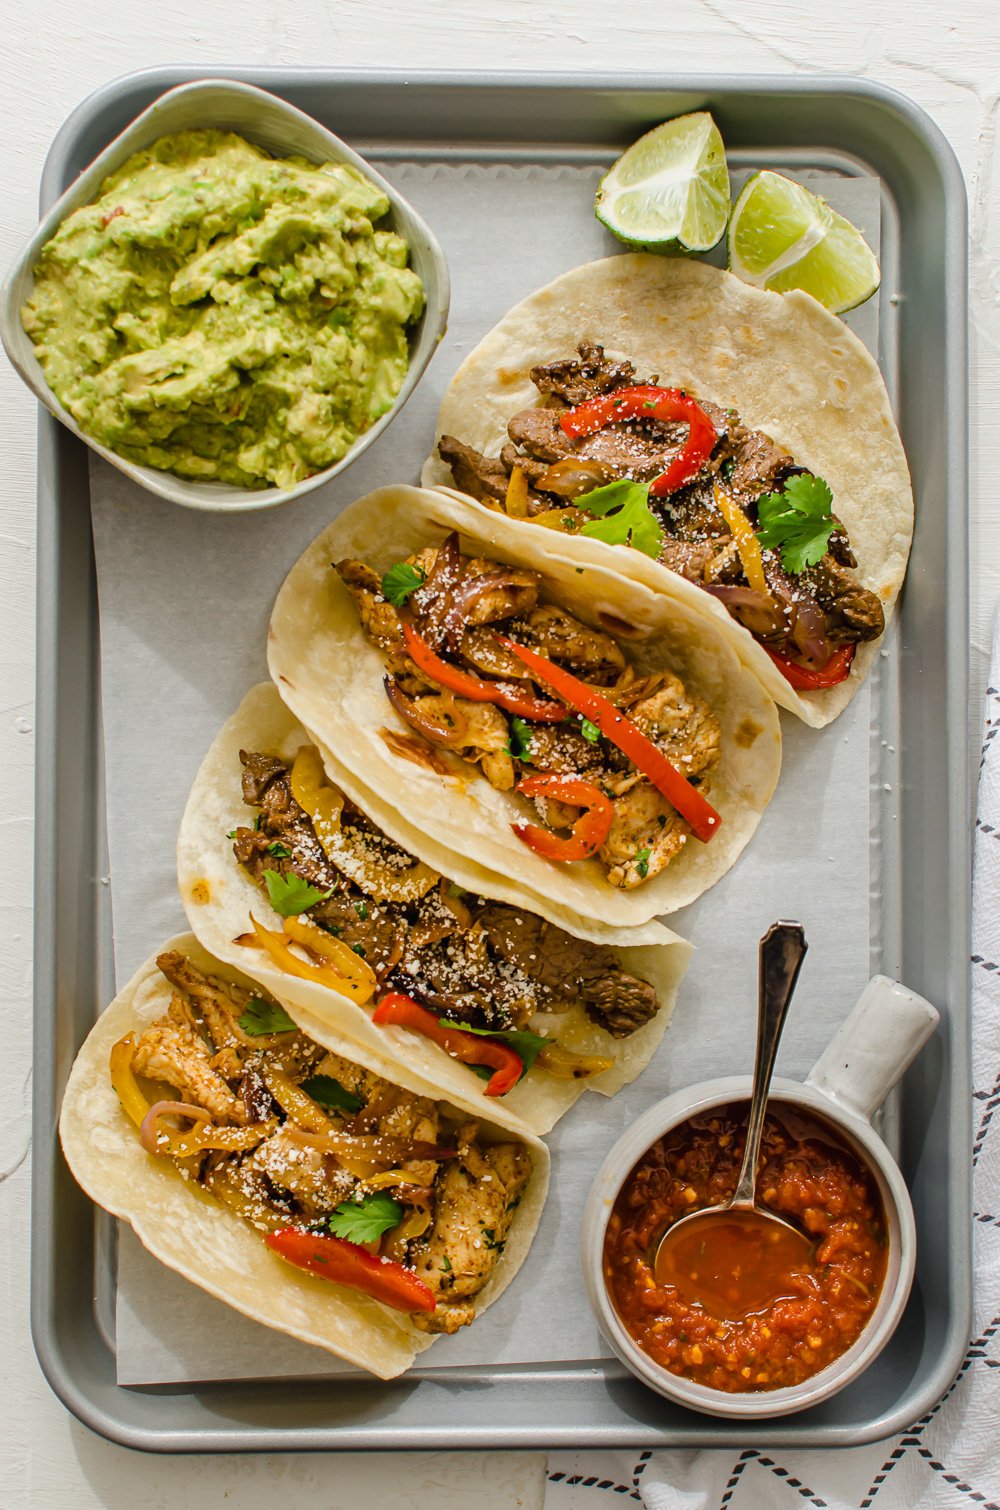 Steak and chicken fajitas lined up on a tray with salsa, lime, and guacamole on the side.